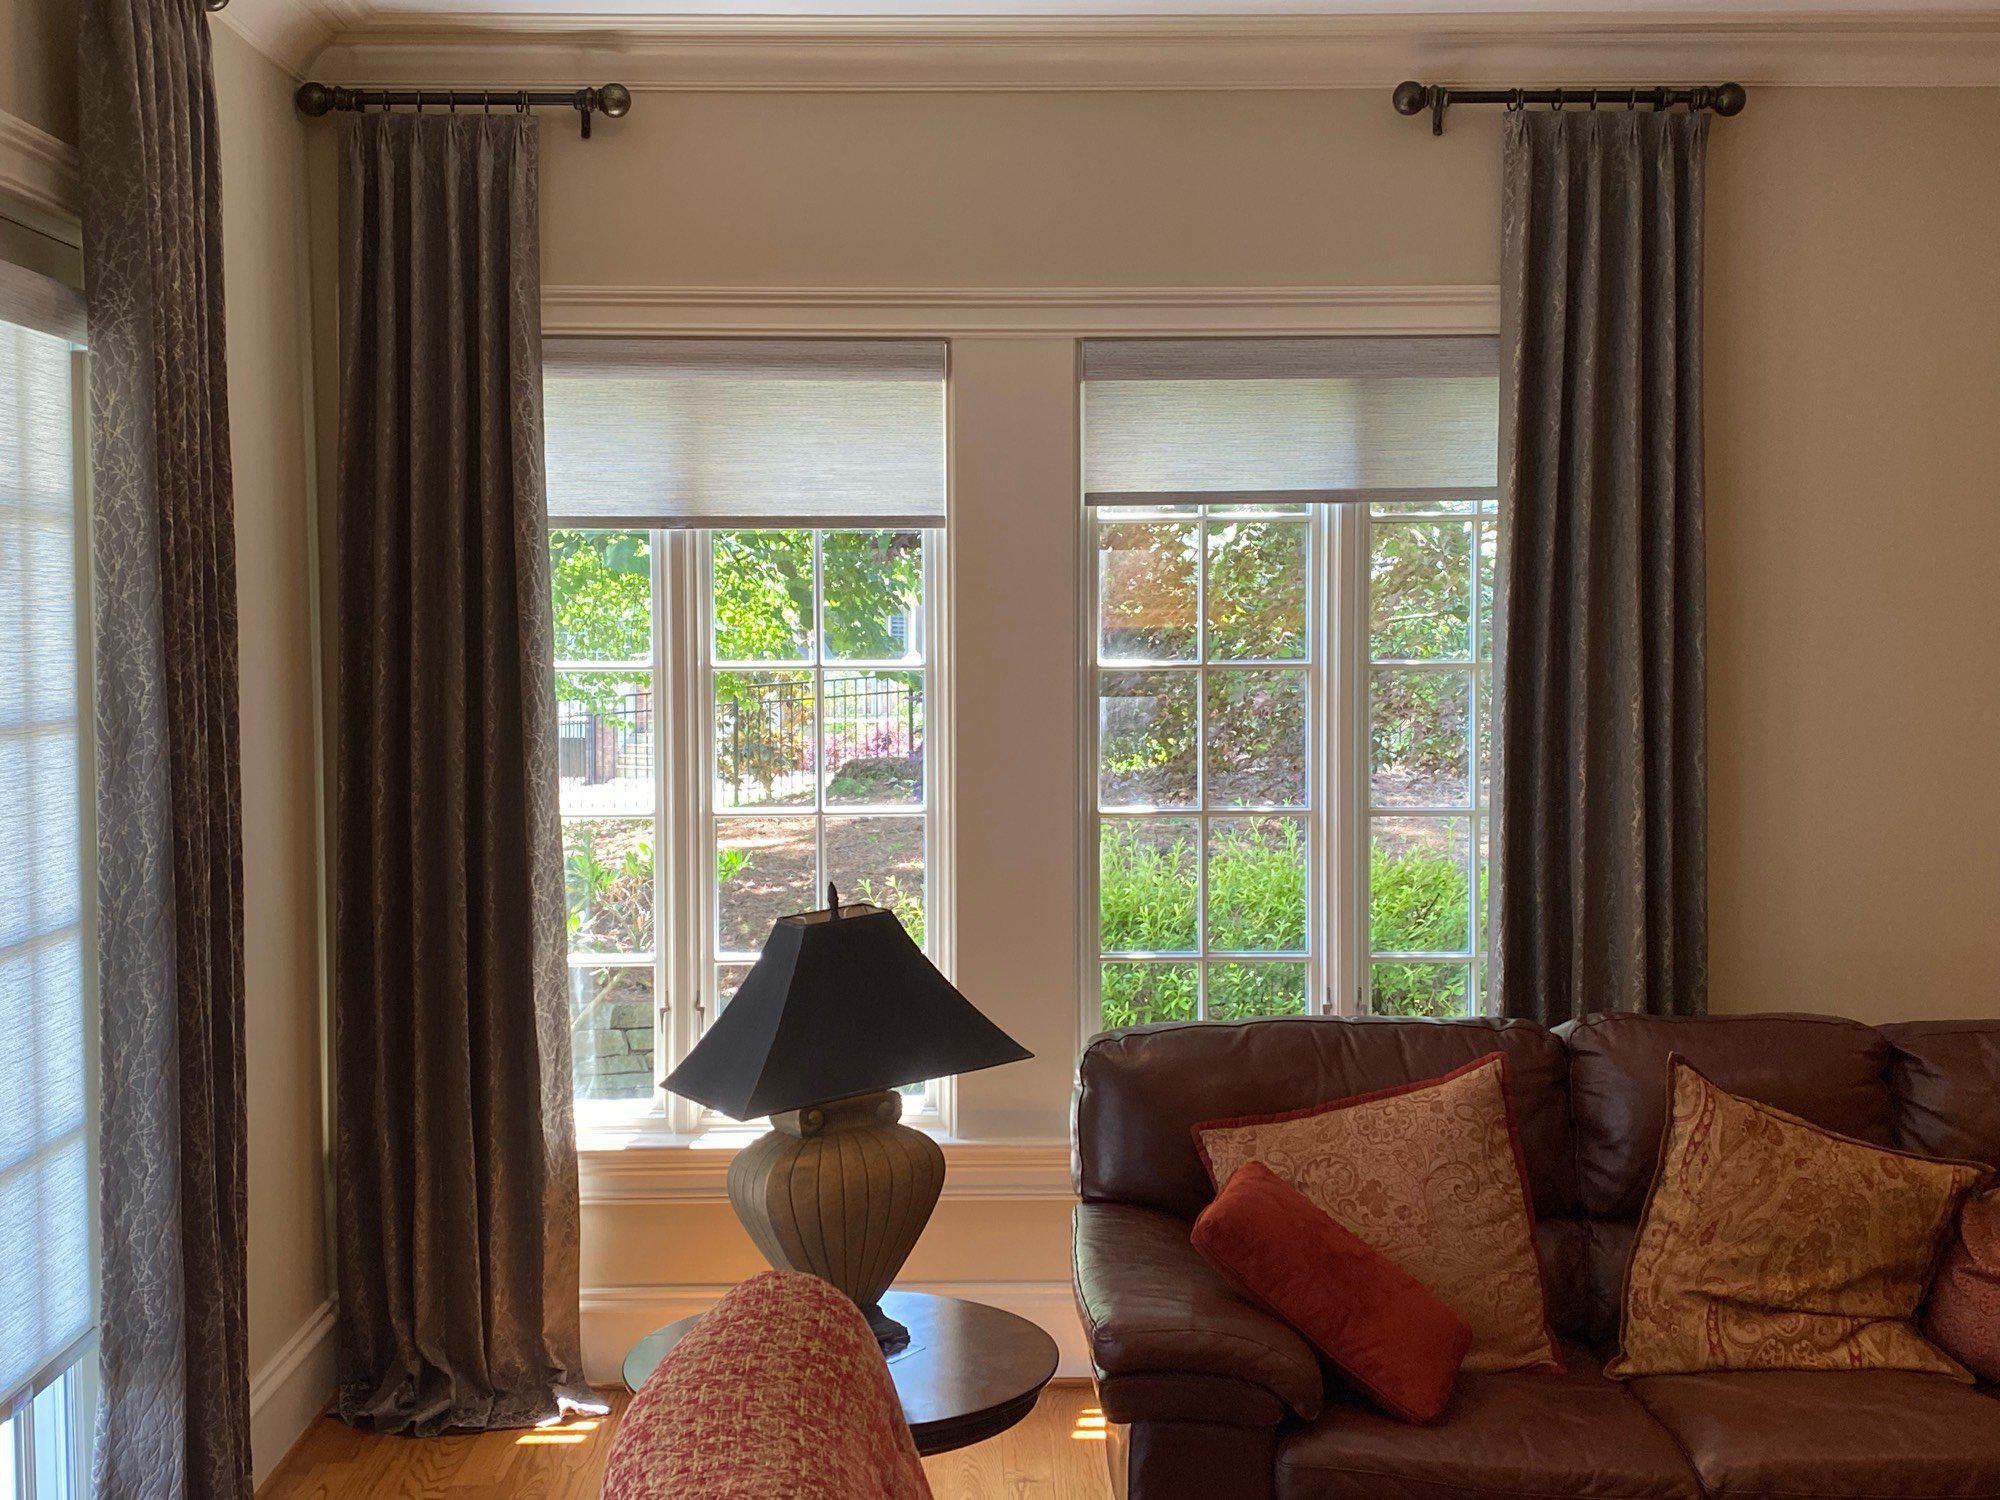 French doors and windows are so elegant—and they add a sense of height to spaces, too. In this home, Budget Blinds of Knoxville & Maryville Knoxville (865)588-3377